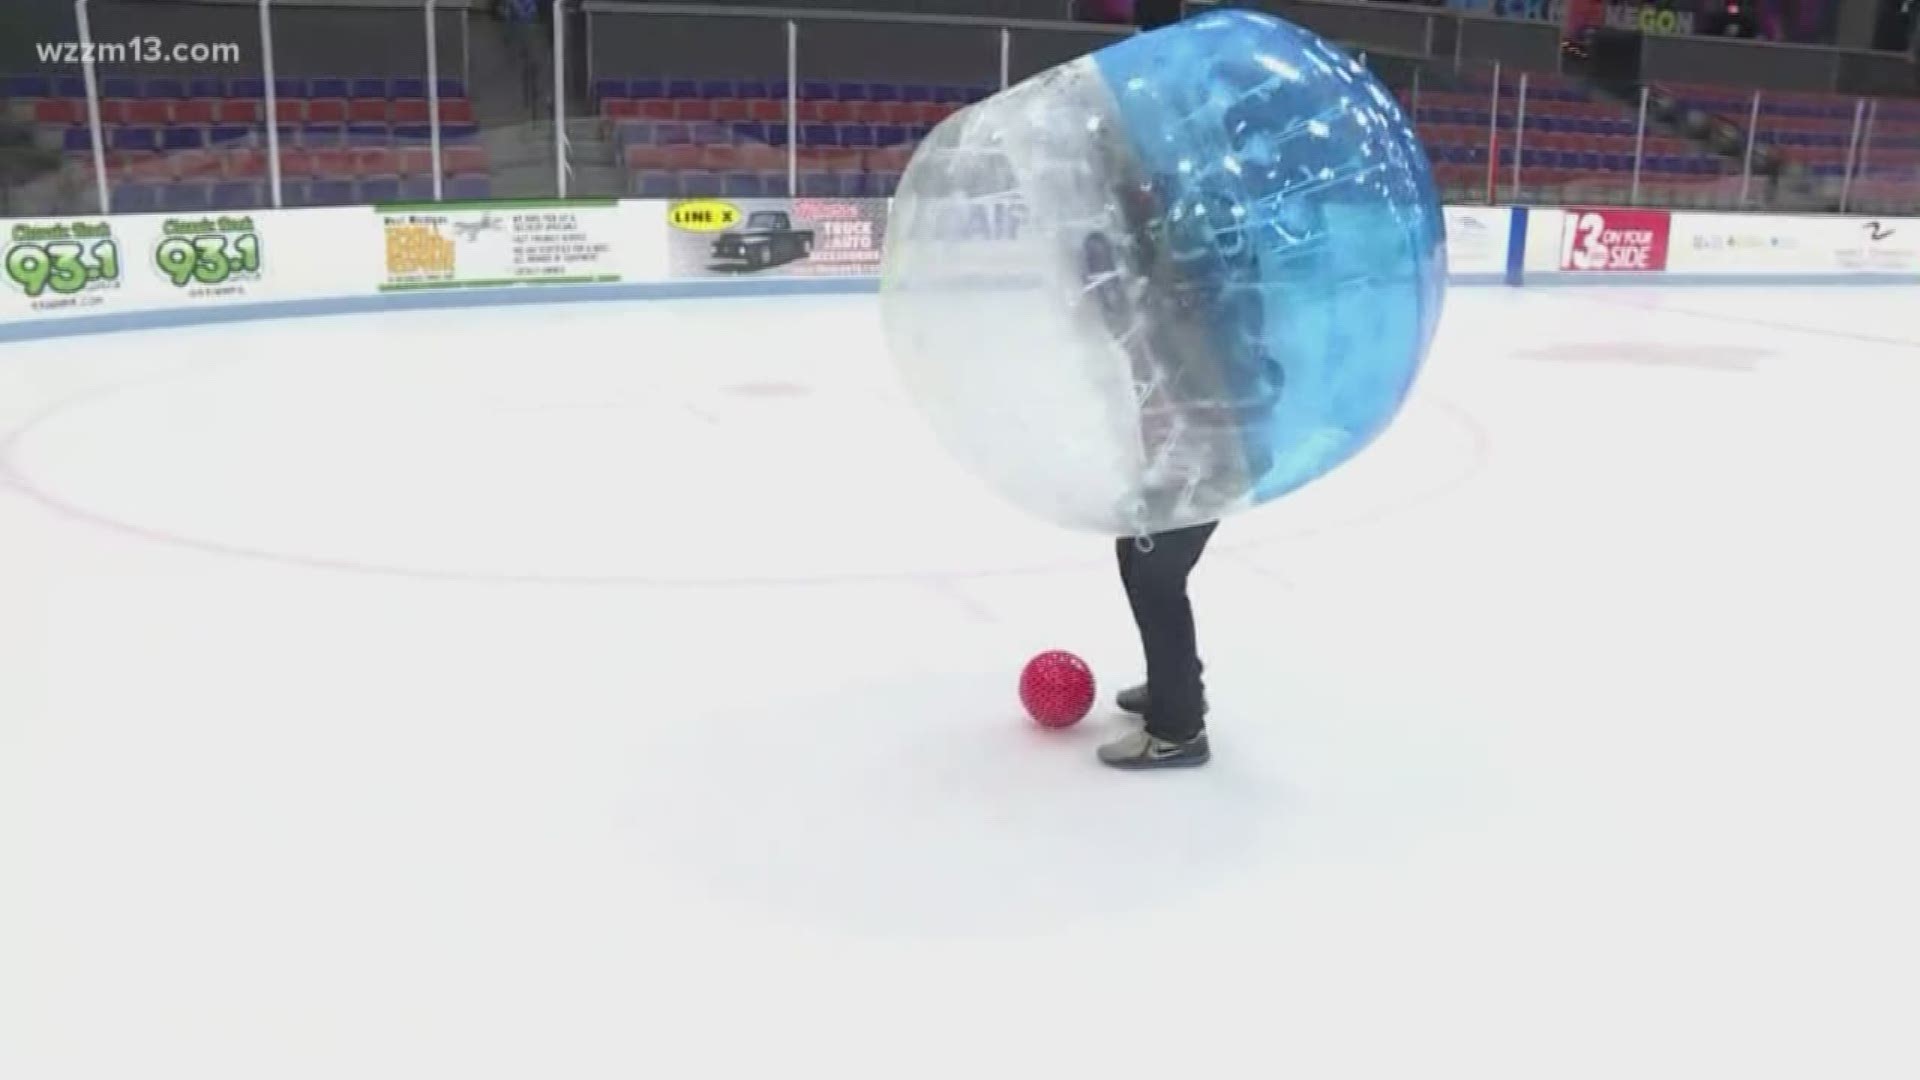 The Muskegon Lumberjacks are hosting 13 On Your Side Night Sunday, January 13th. During intermission, James Starks, Aaron Ofseyer and Dave Kaechele will play a friendly game of bubble ball.